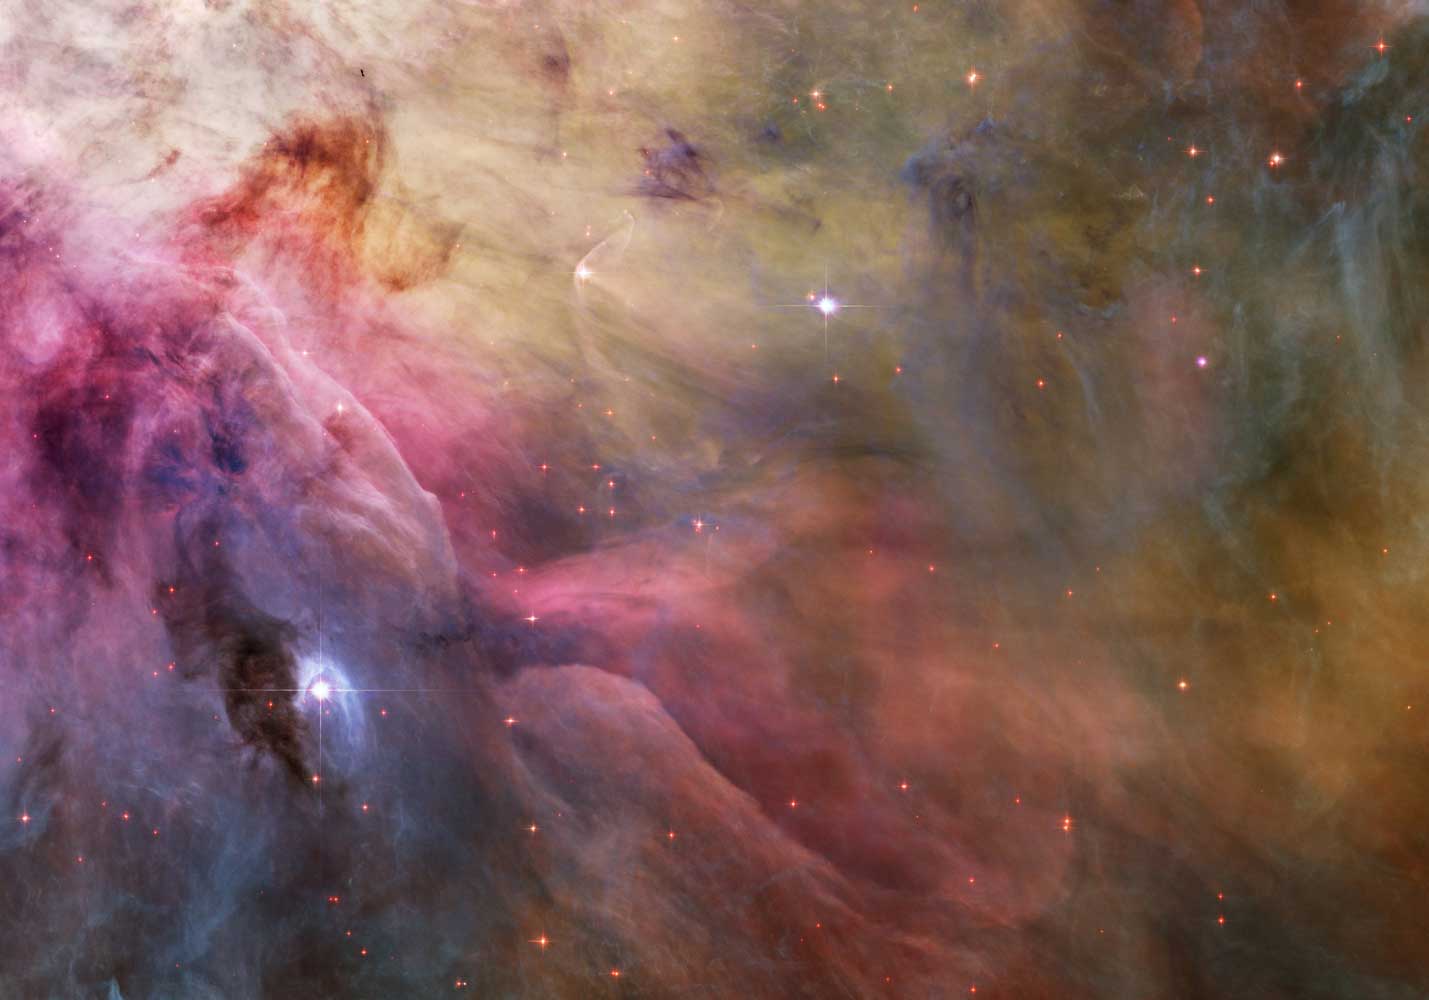 This close-up of cosmic clouds and stellar winds features LL Orionis interacting with the Orion Nebula flow.